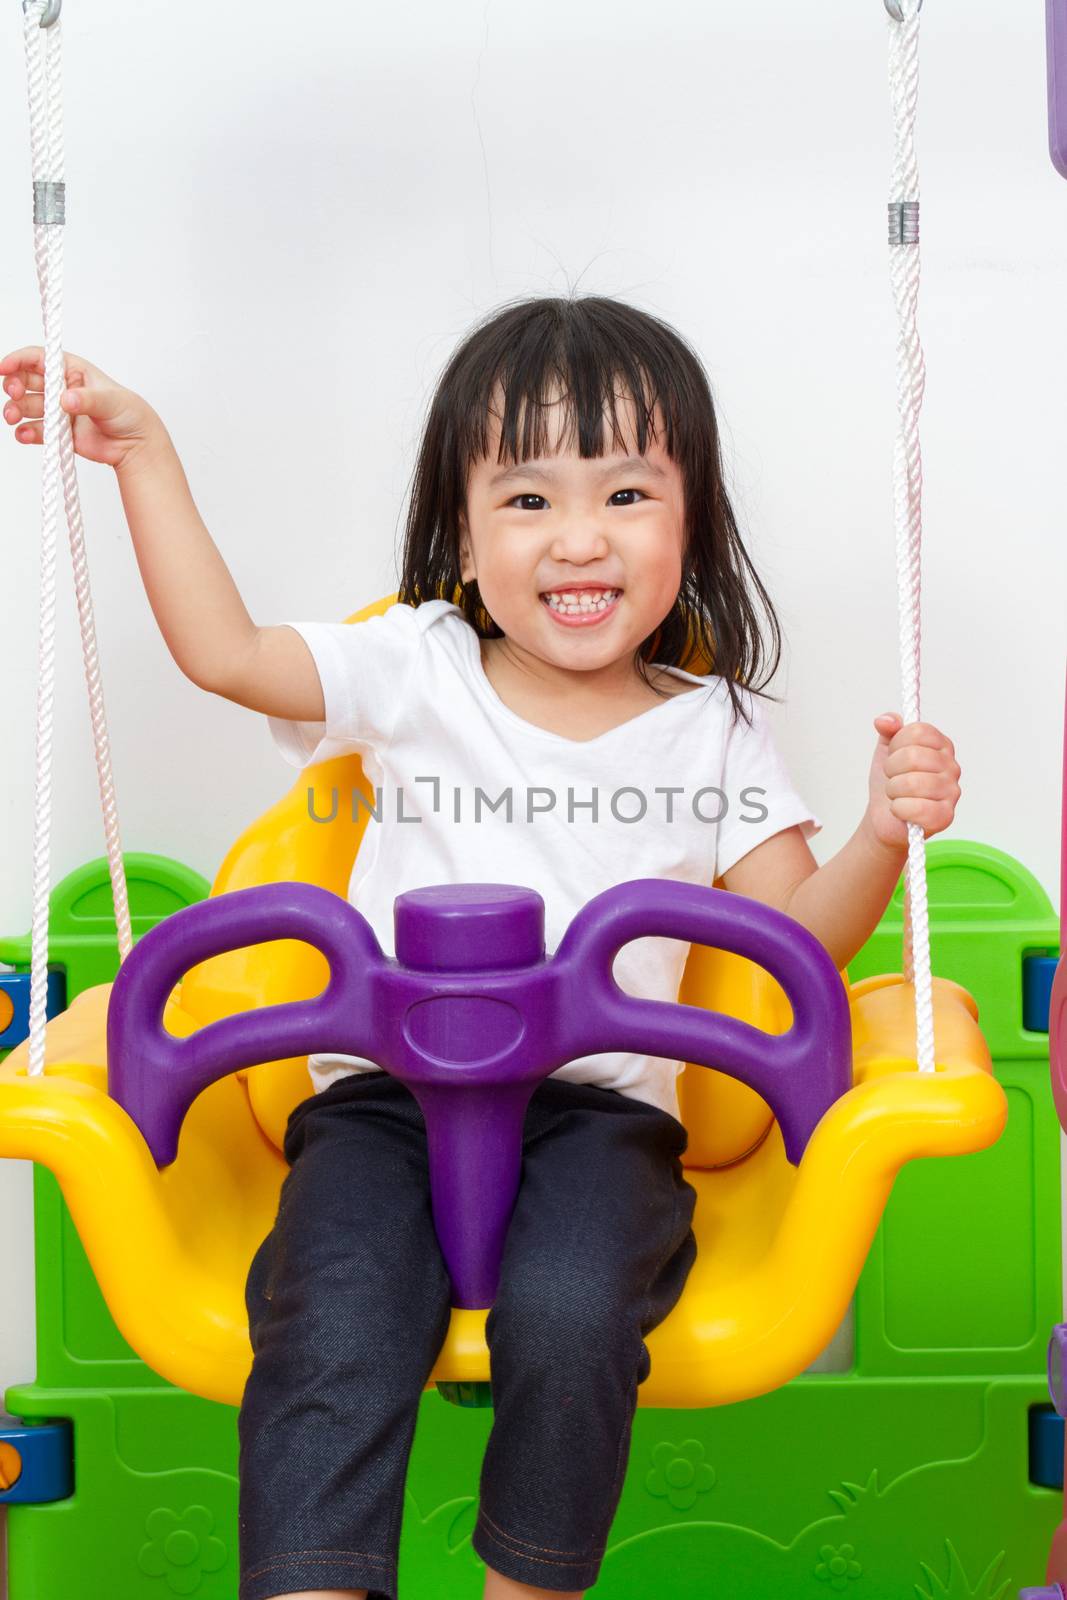 Asian Chinese children playing on swing at indoor playground.